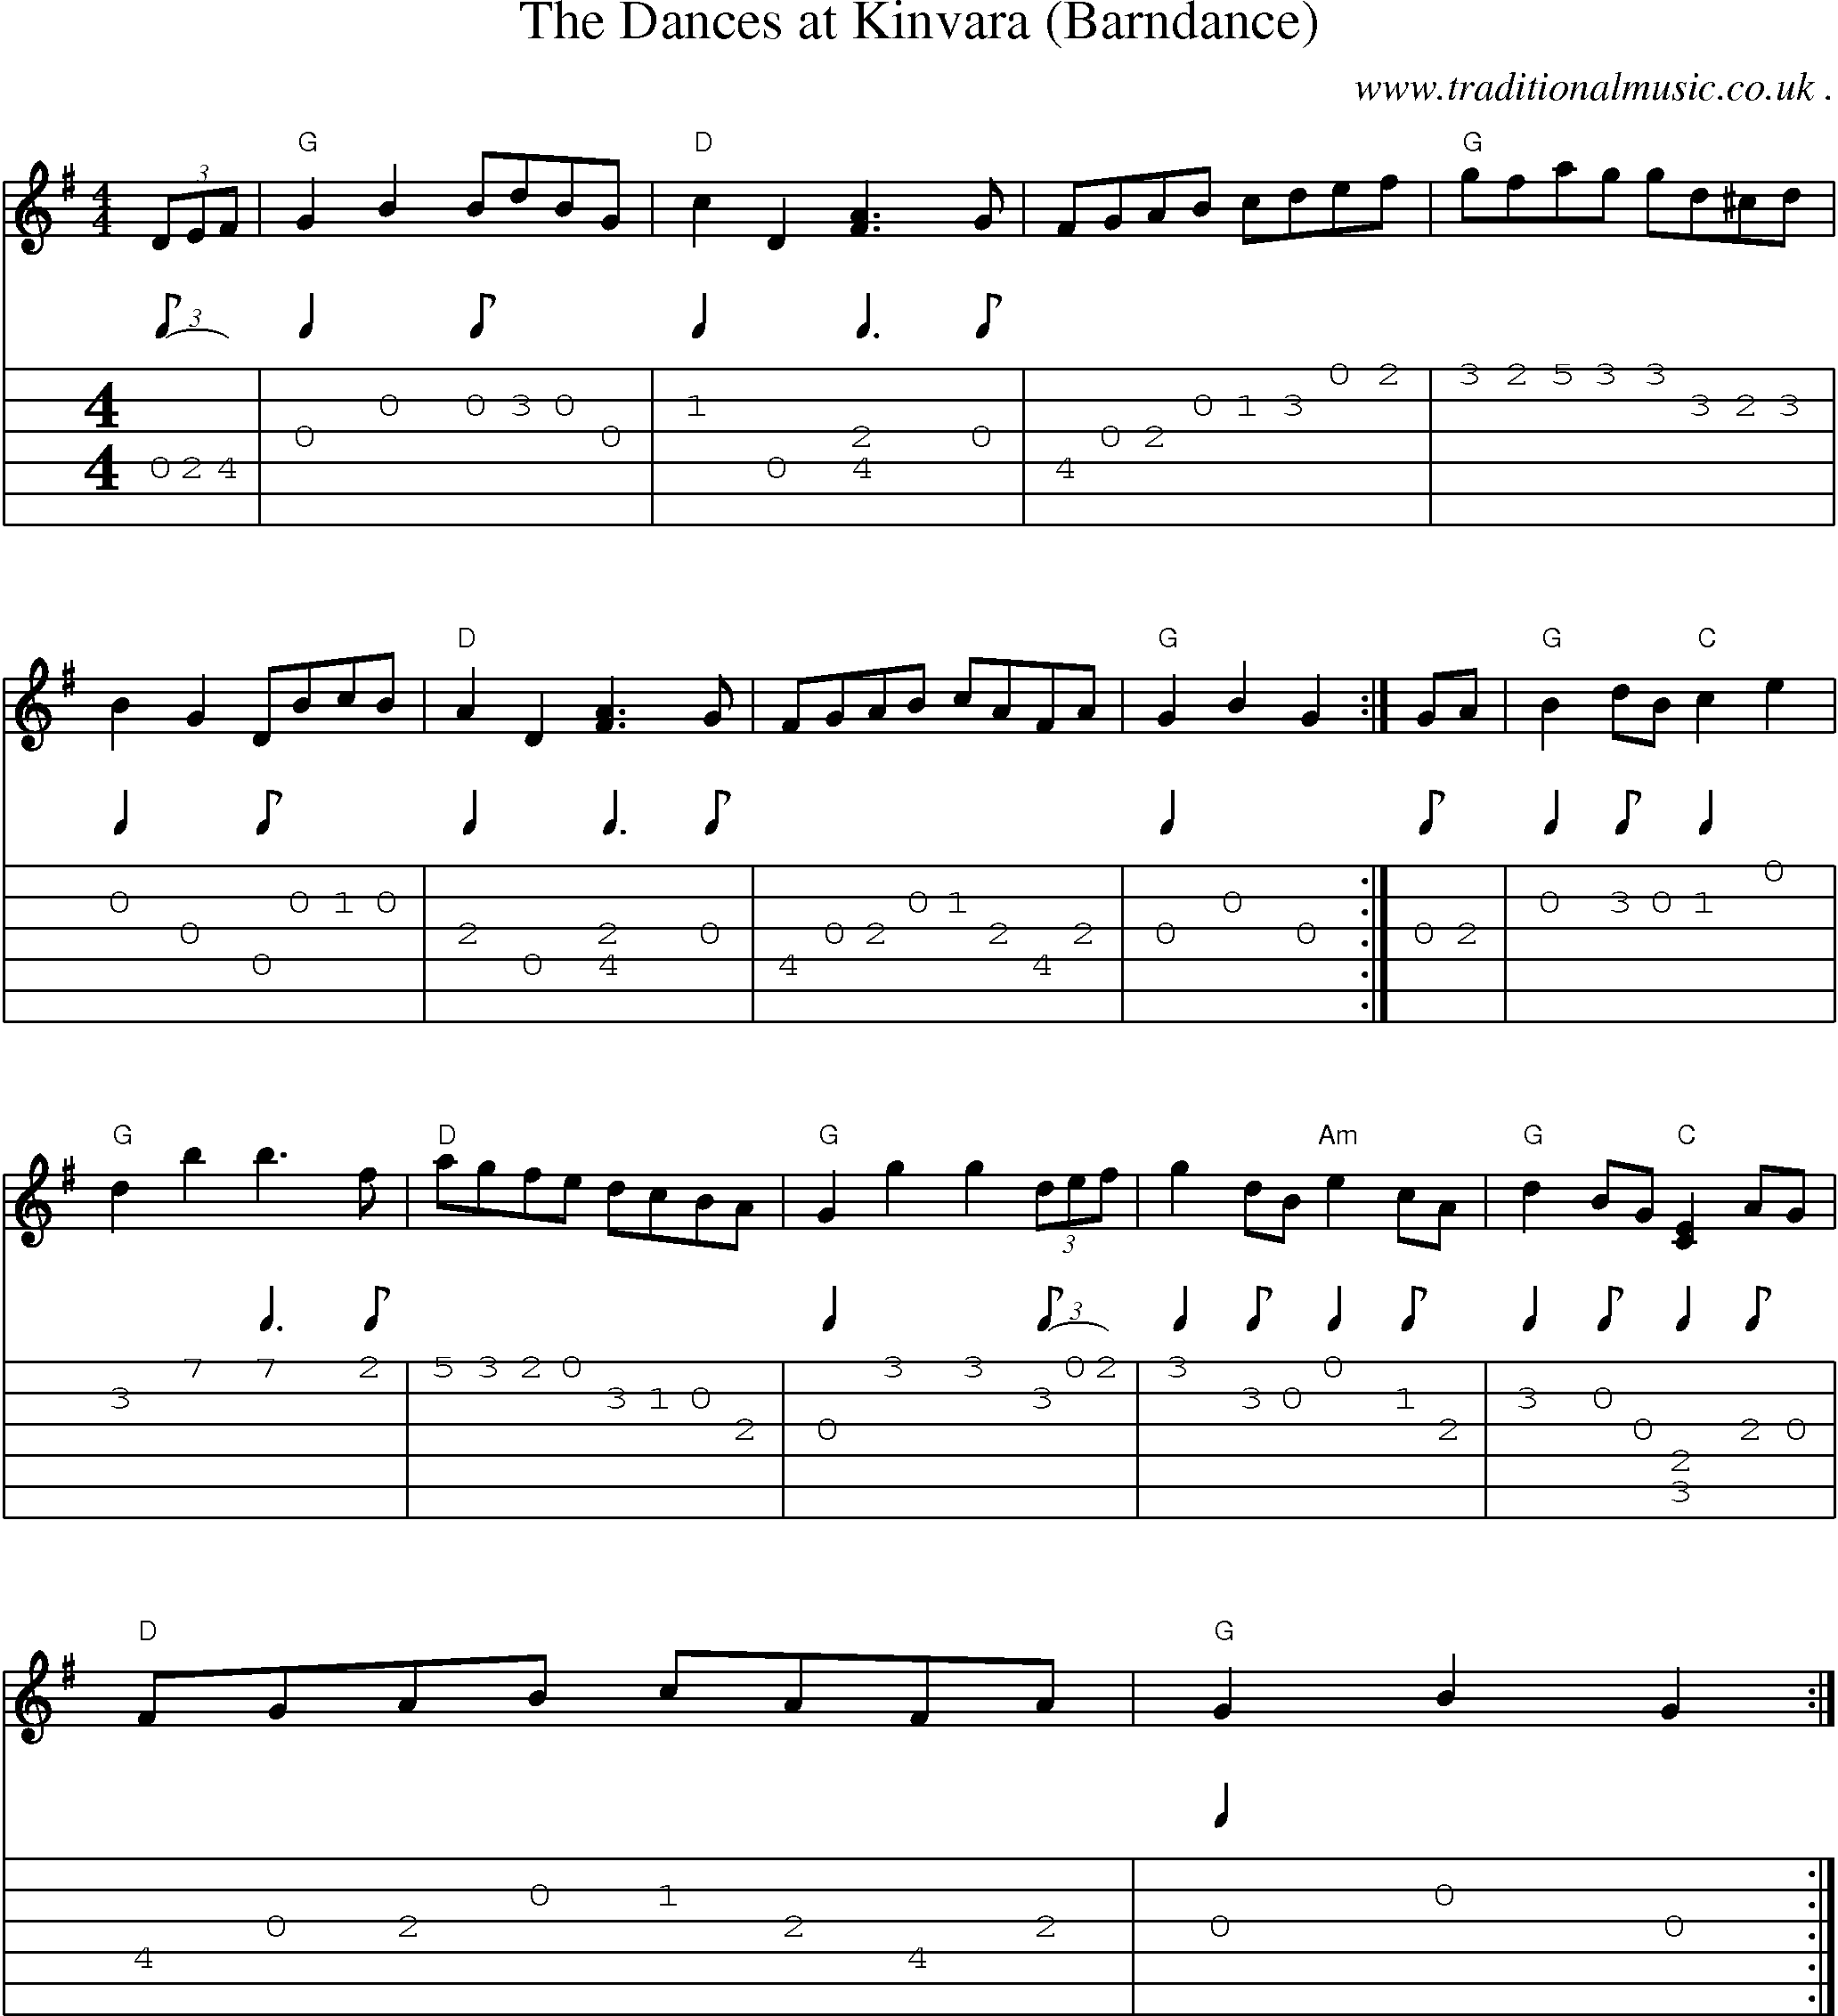 Music Score and Guitar Tabs for The Dances At Kinvara (barndance)